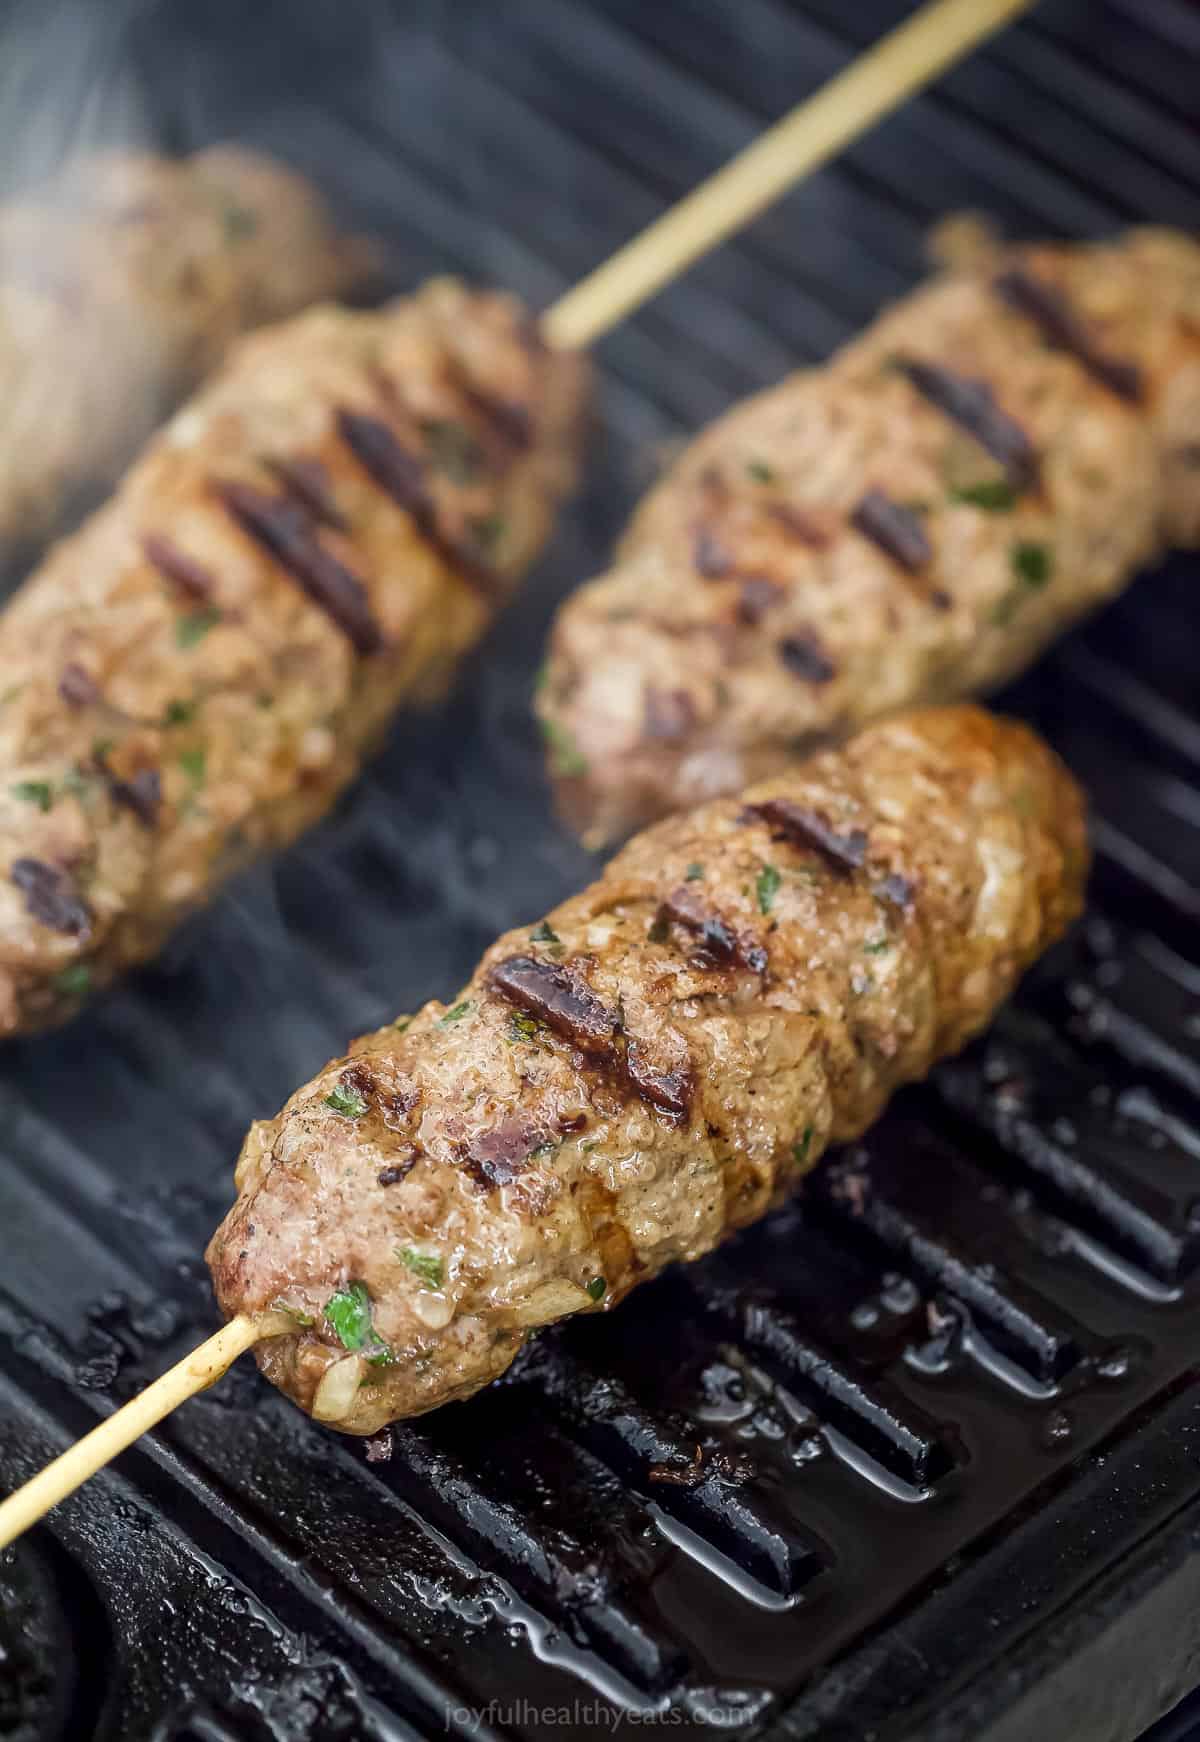 Four ground beef keftas cooking on a stovetop grill pan